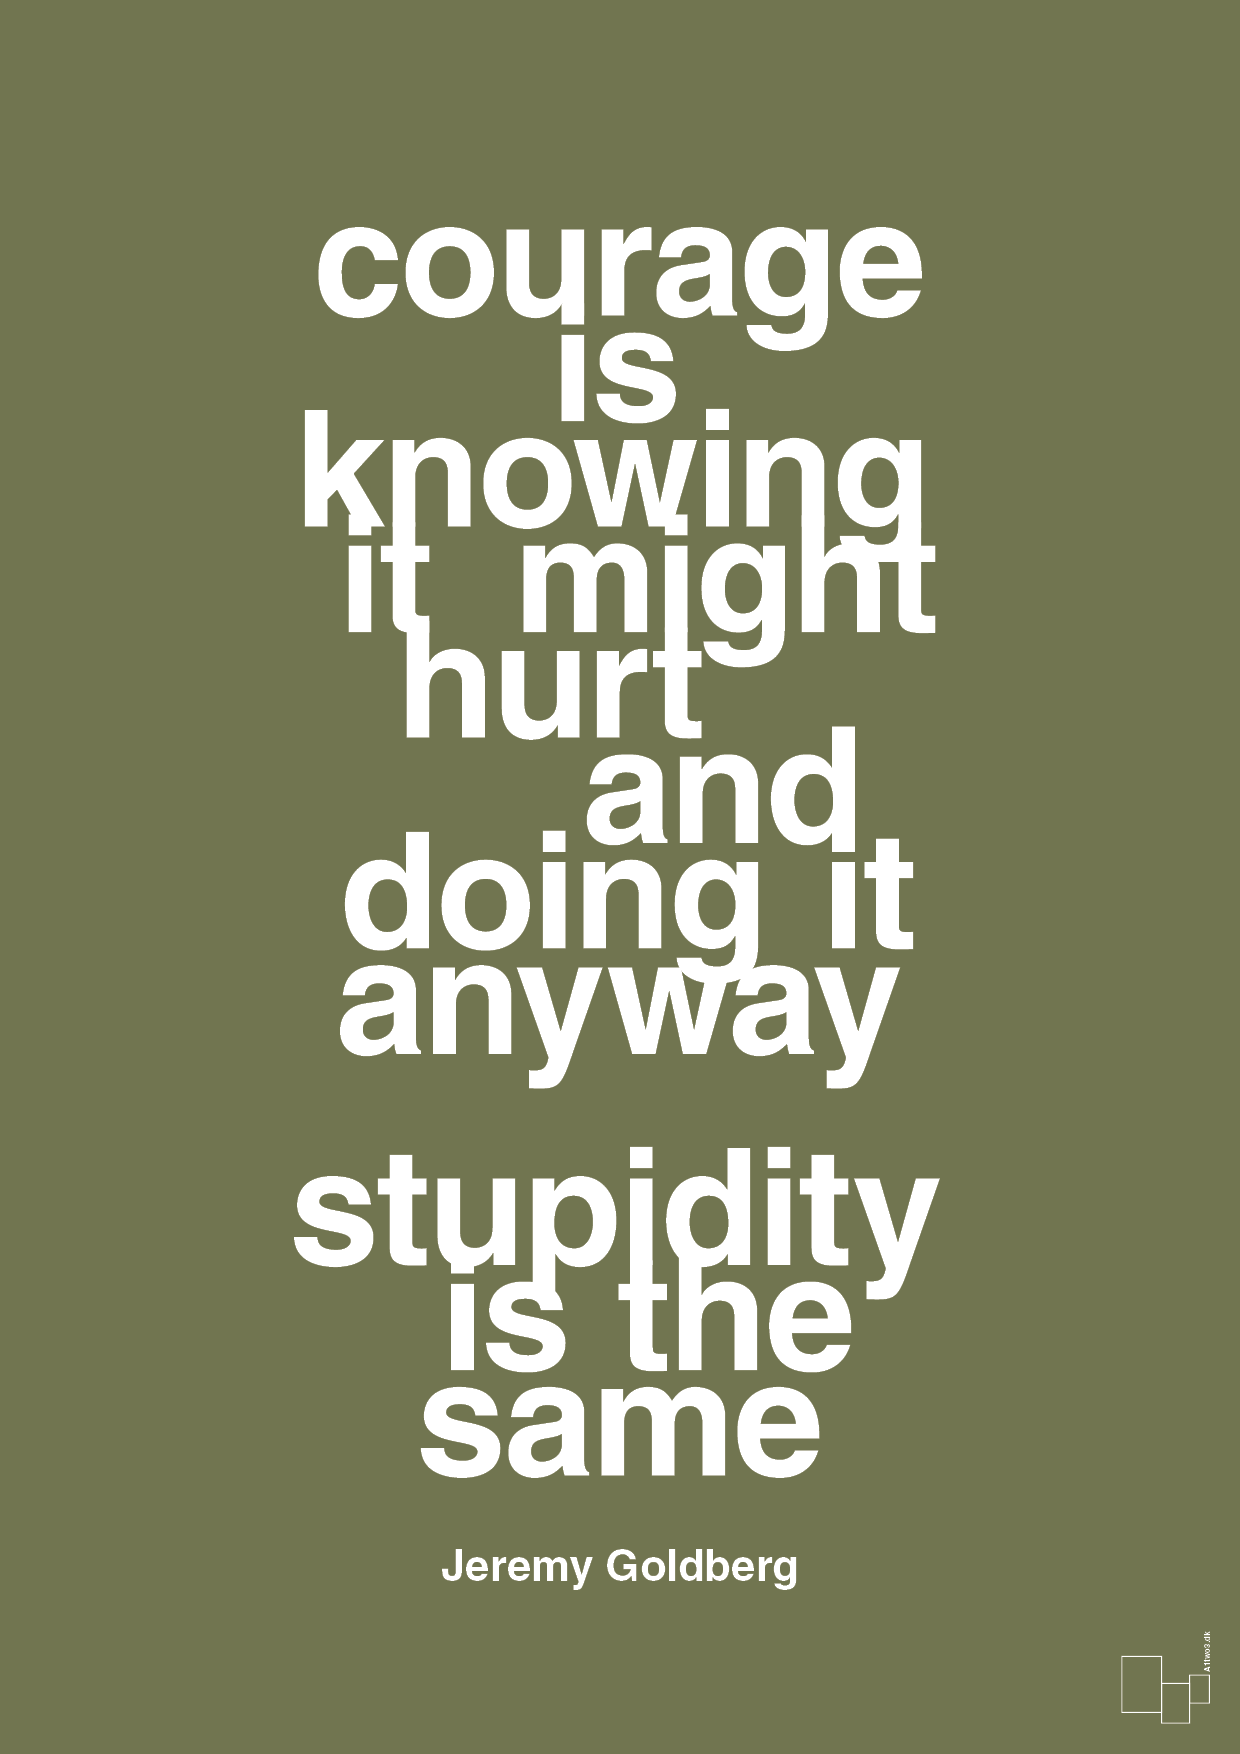 courage is knowing it might hurt and doing it anyway stupidity is the same - Plakat med Citater i Secret Meadow